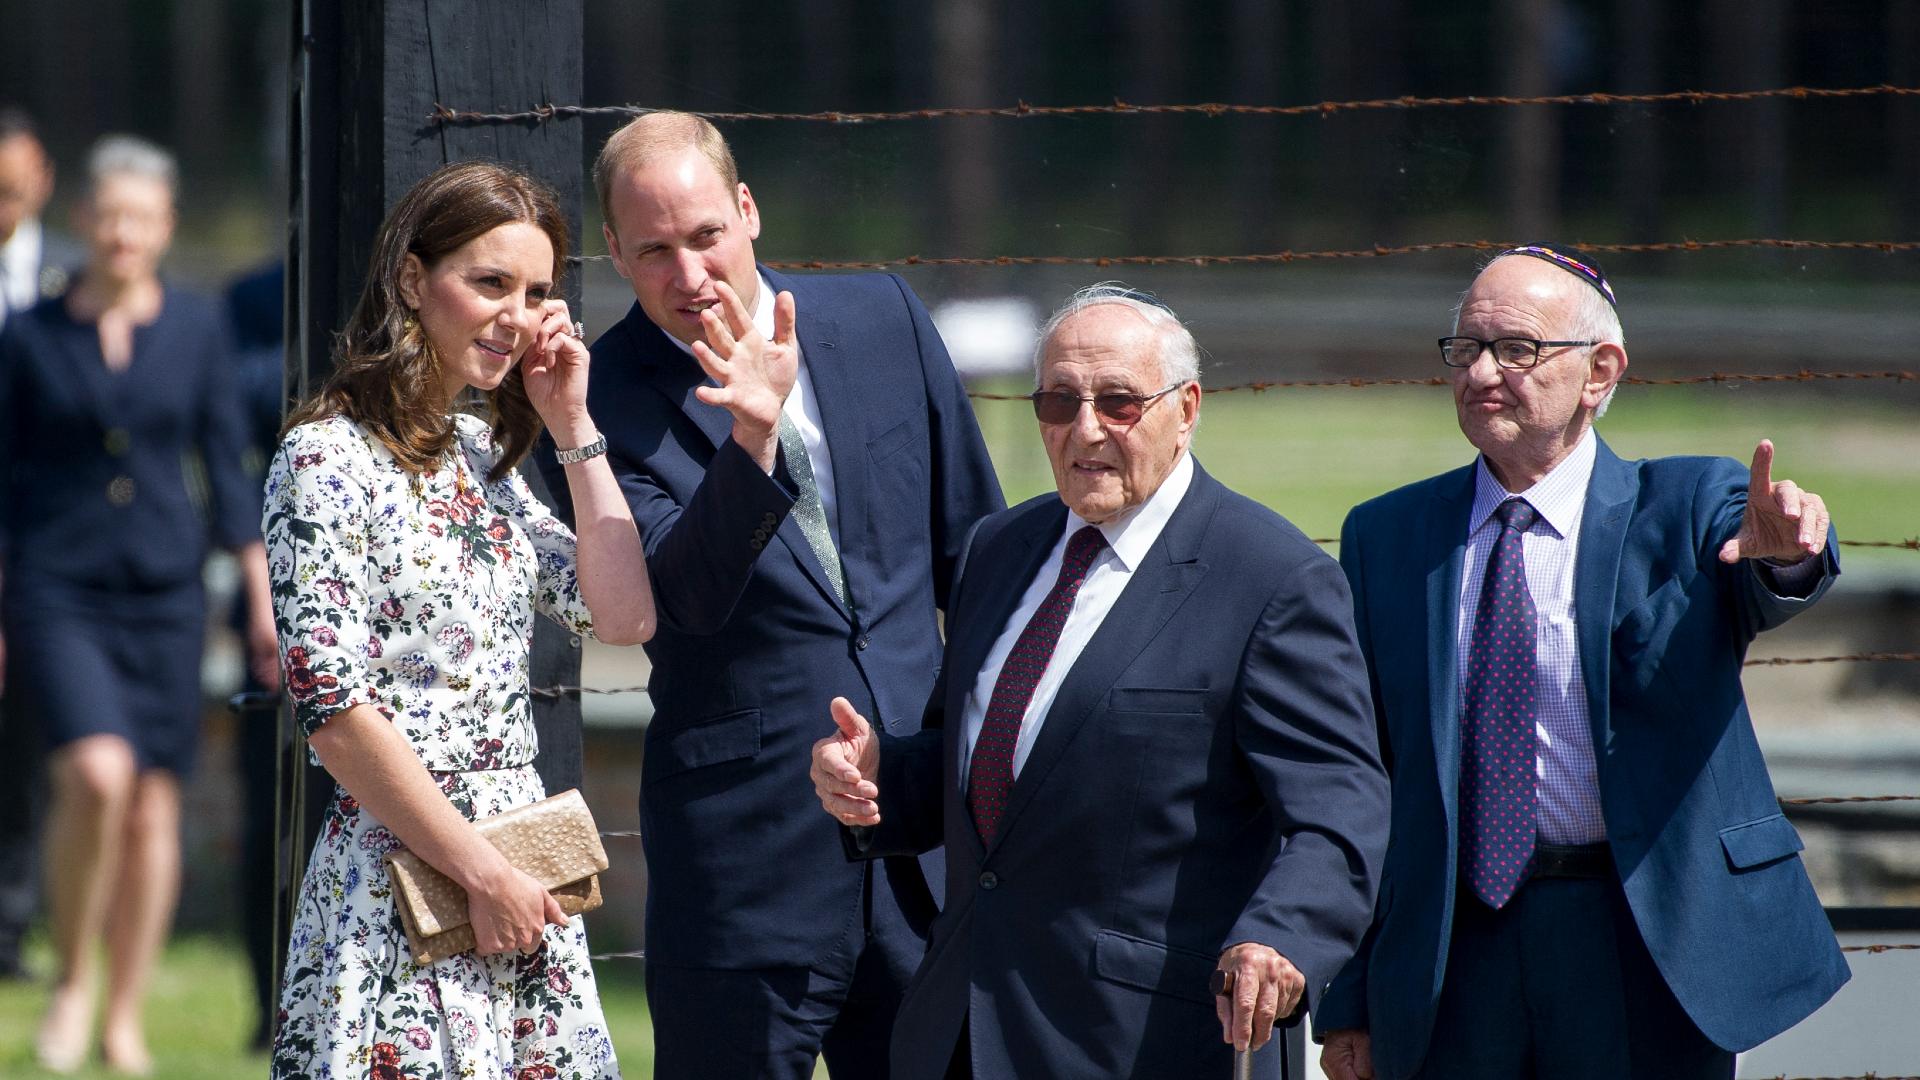 Auschwitz survivors Zigi Shipper (R) and Manfred Goldberg (second R) tour the camp with the Duke and Duchess of Cambridge in 2017 (Simon Krawczyk/AFP)